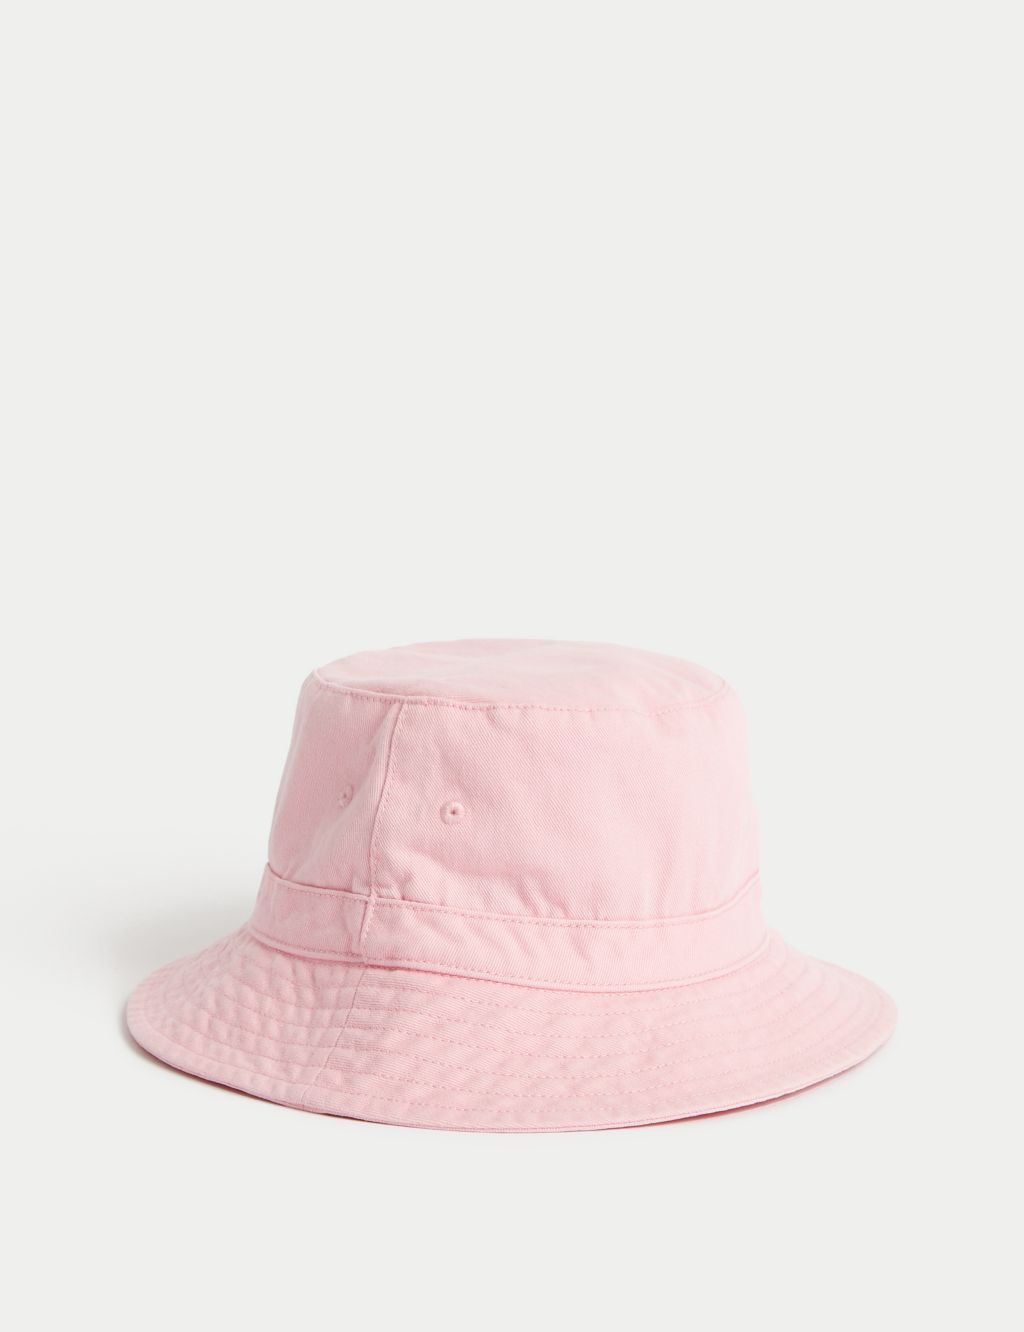 Kids' Pure Cotton Sun Hat (12 Months - 13 Years) image 2